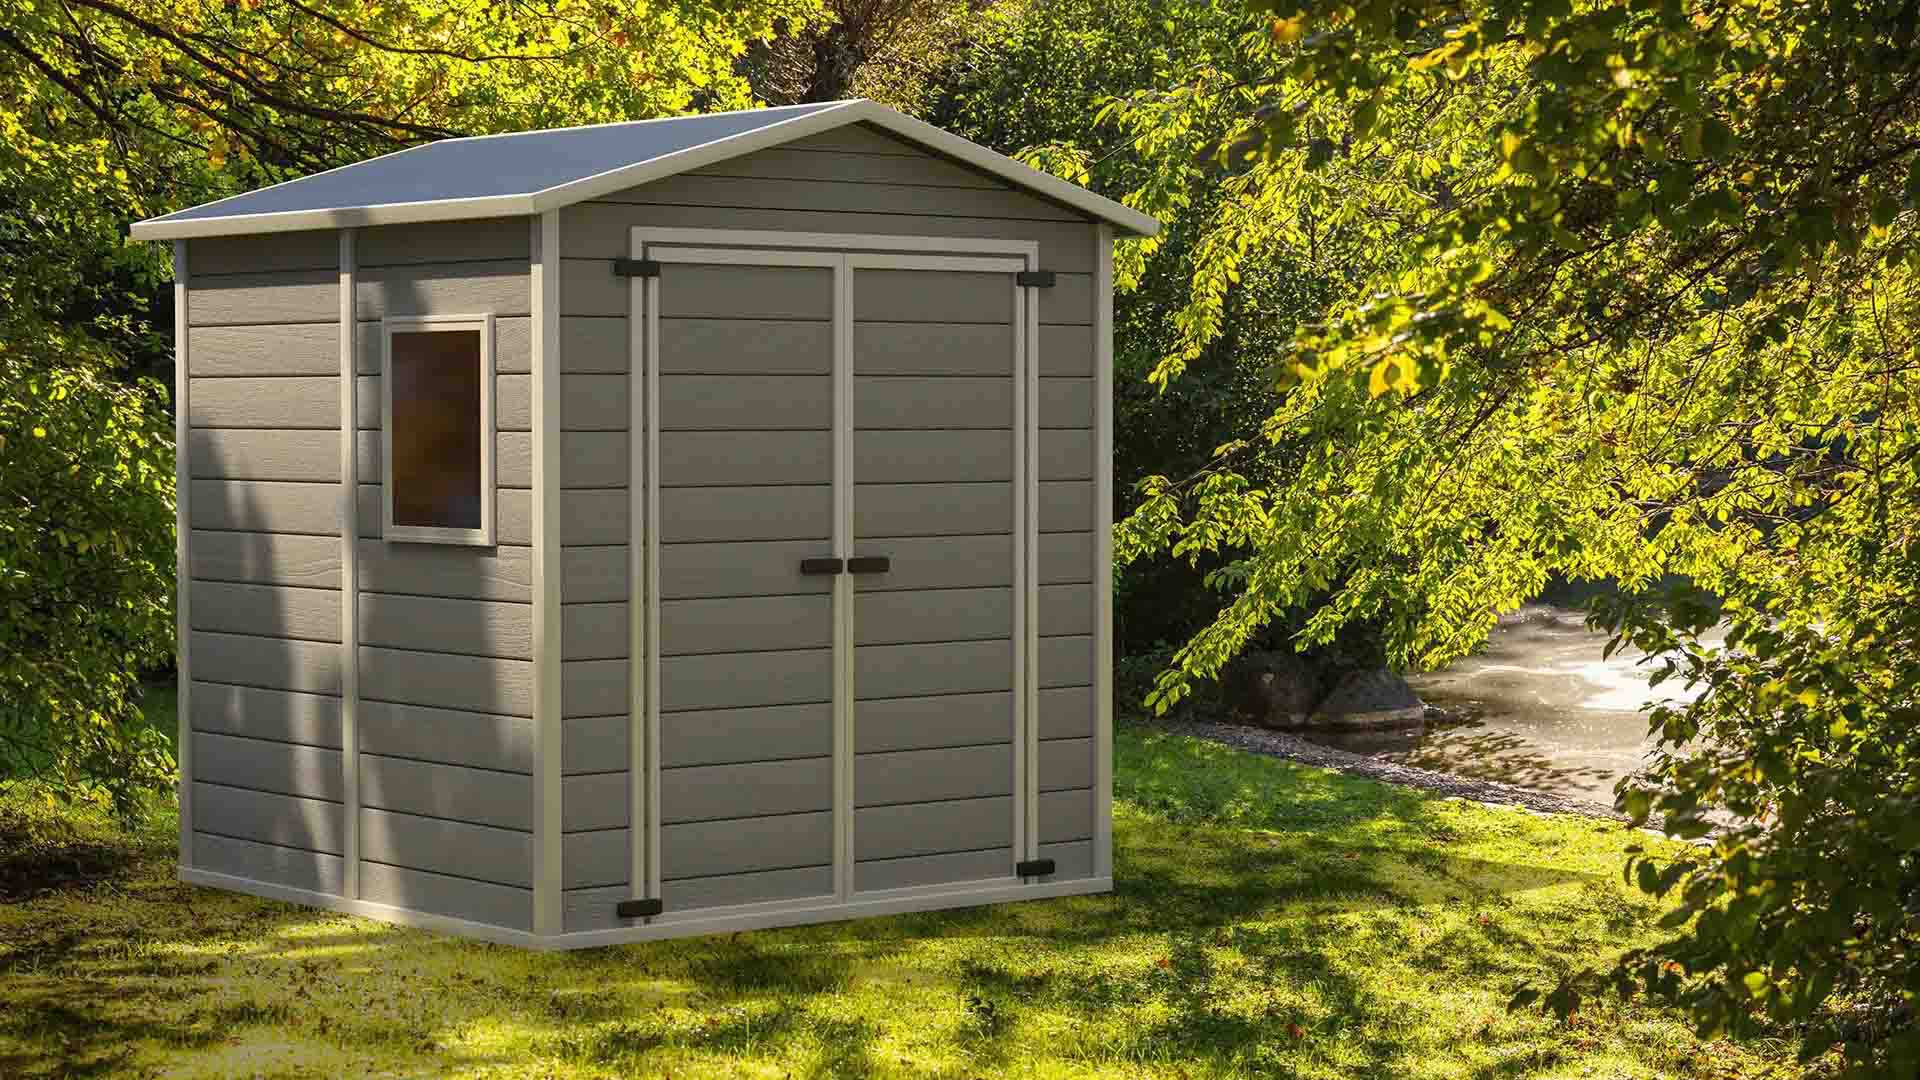 Sun Rise Sheds | 5 Questions To Ask When Looking For A New Portable Building